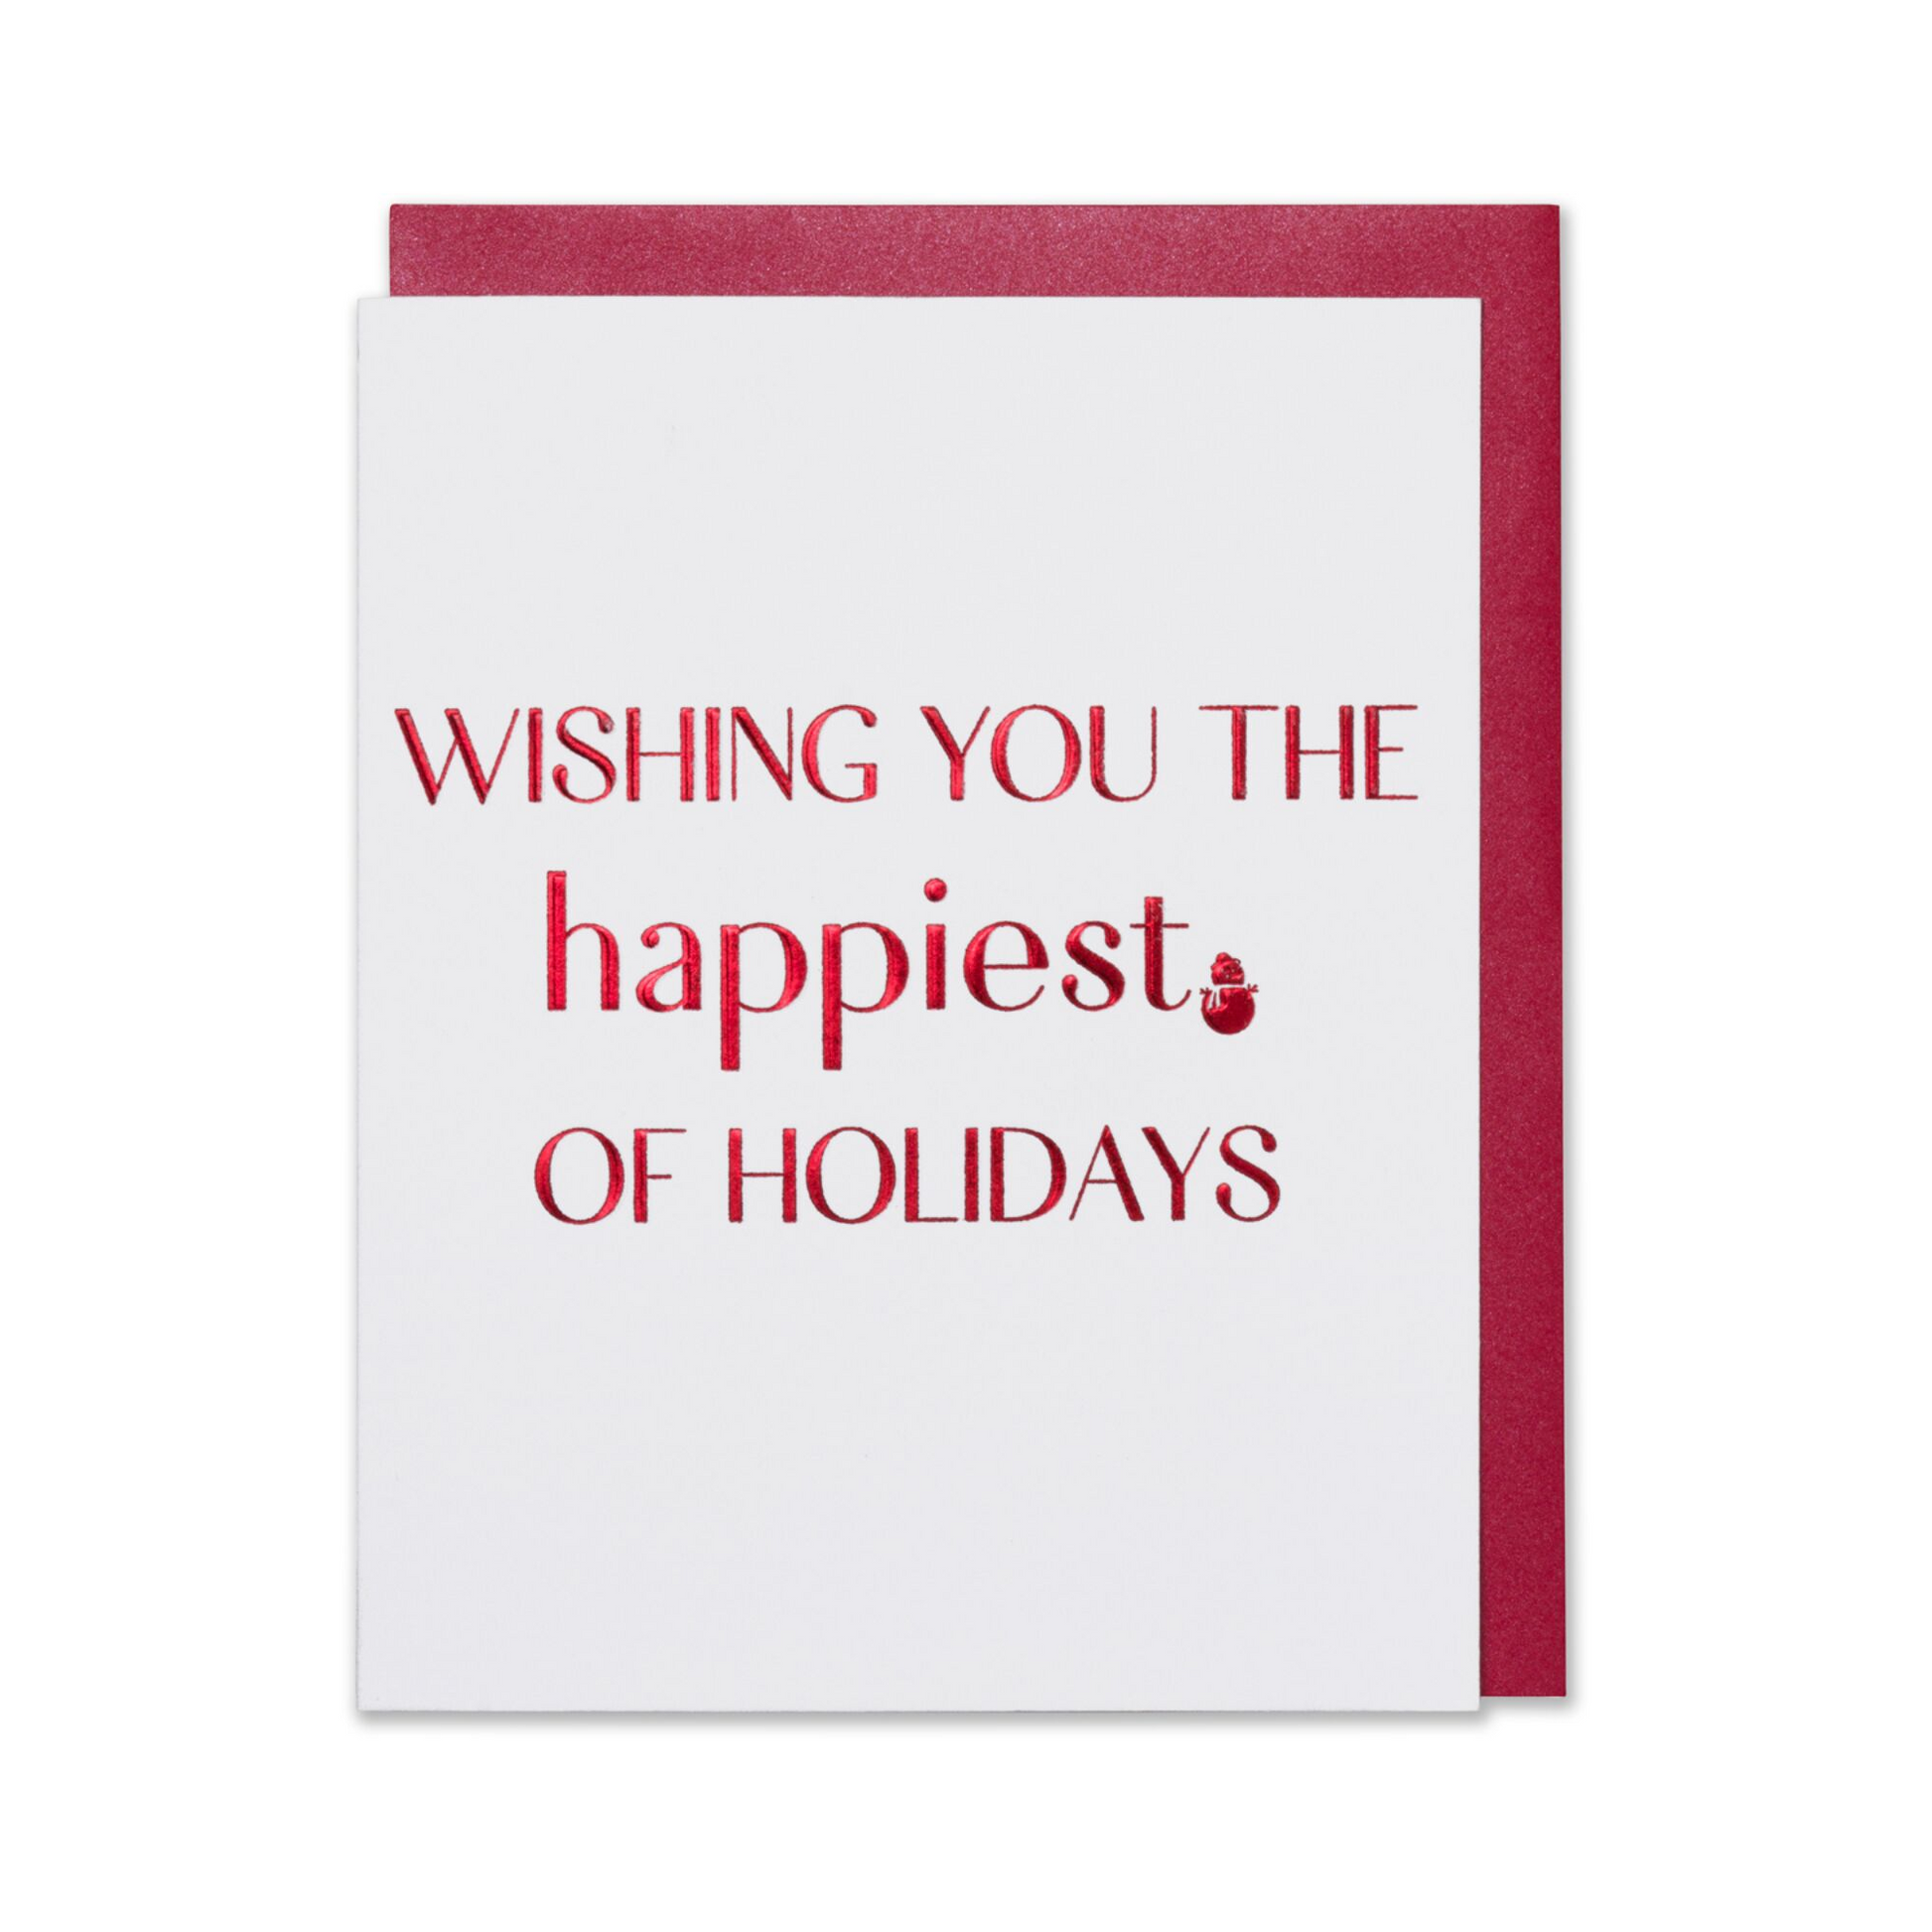 Wishing You The Happiest Of Holidays, Christmas Holiday Card